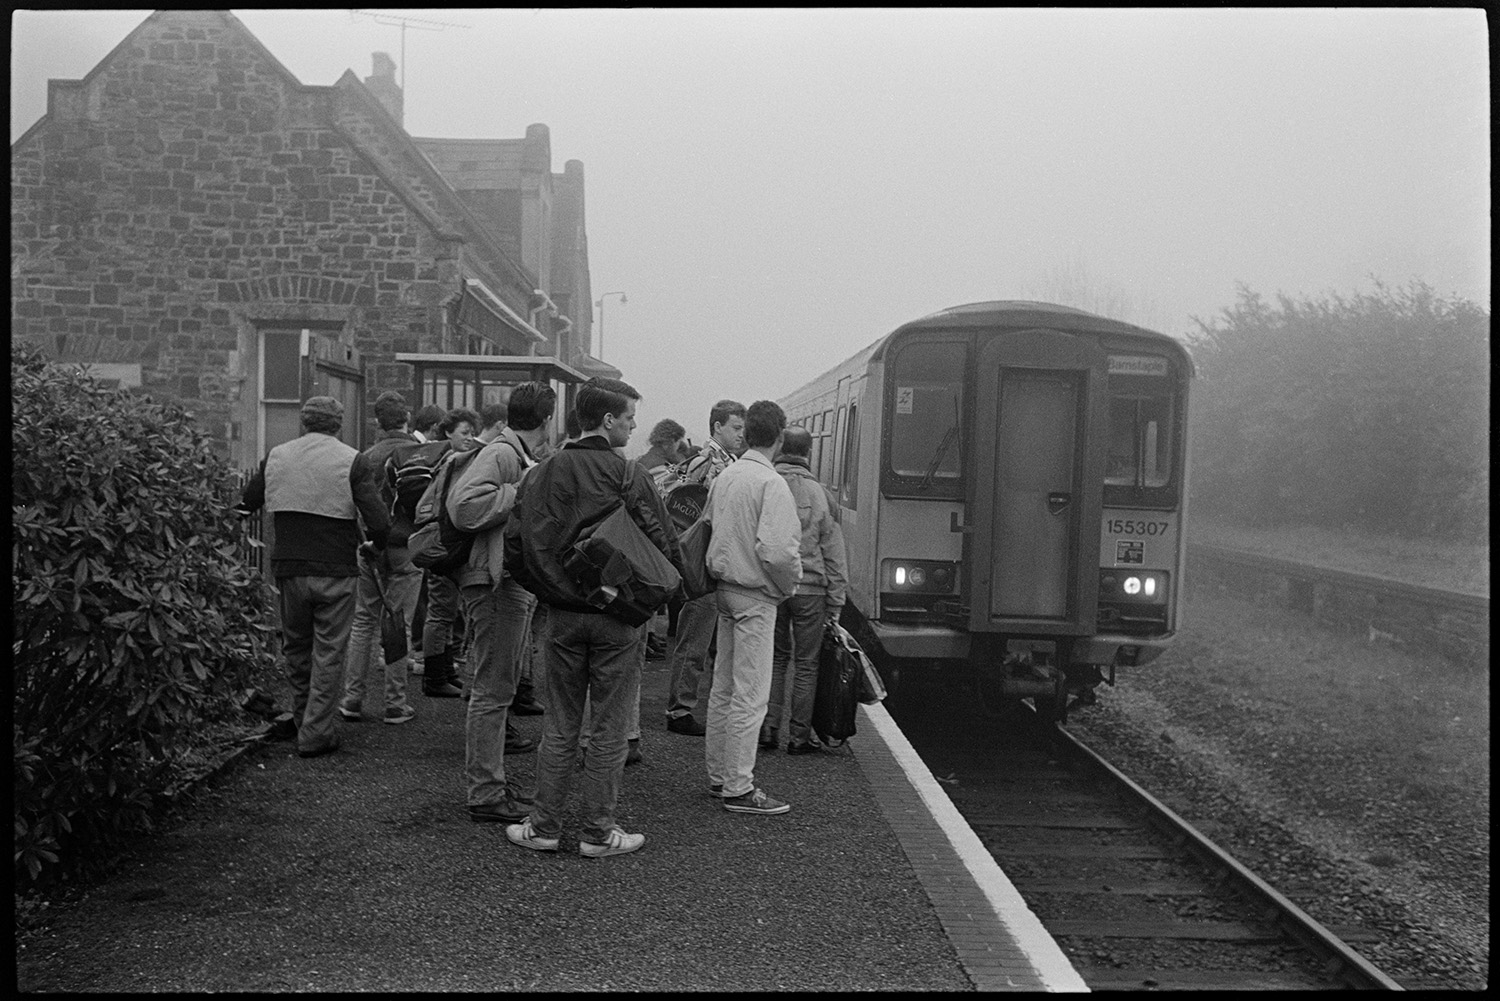 Railway station, platform with train and passengers. 
[Passengers waiting on the platform at Kings Nympton railway station to board at train which has just pulled in. The station buildings is visible in the background.]